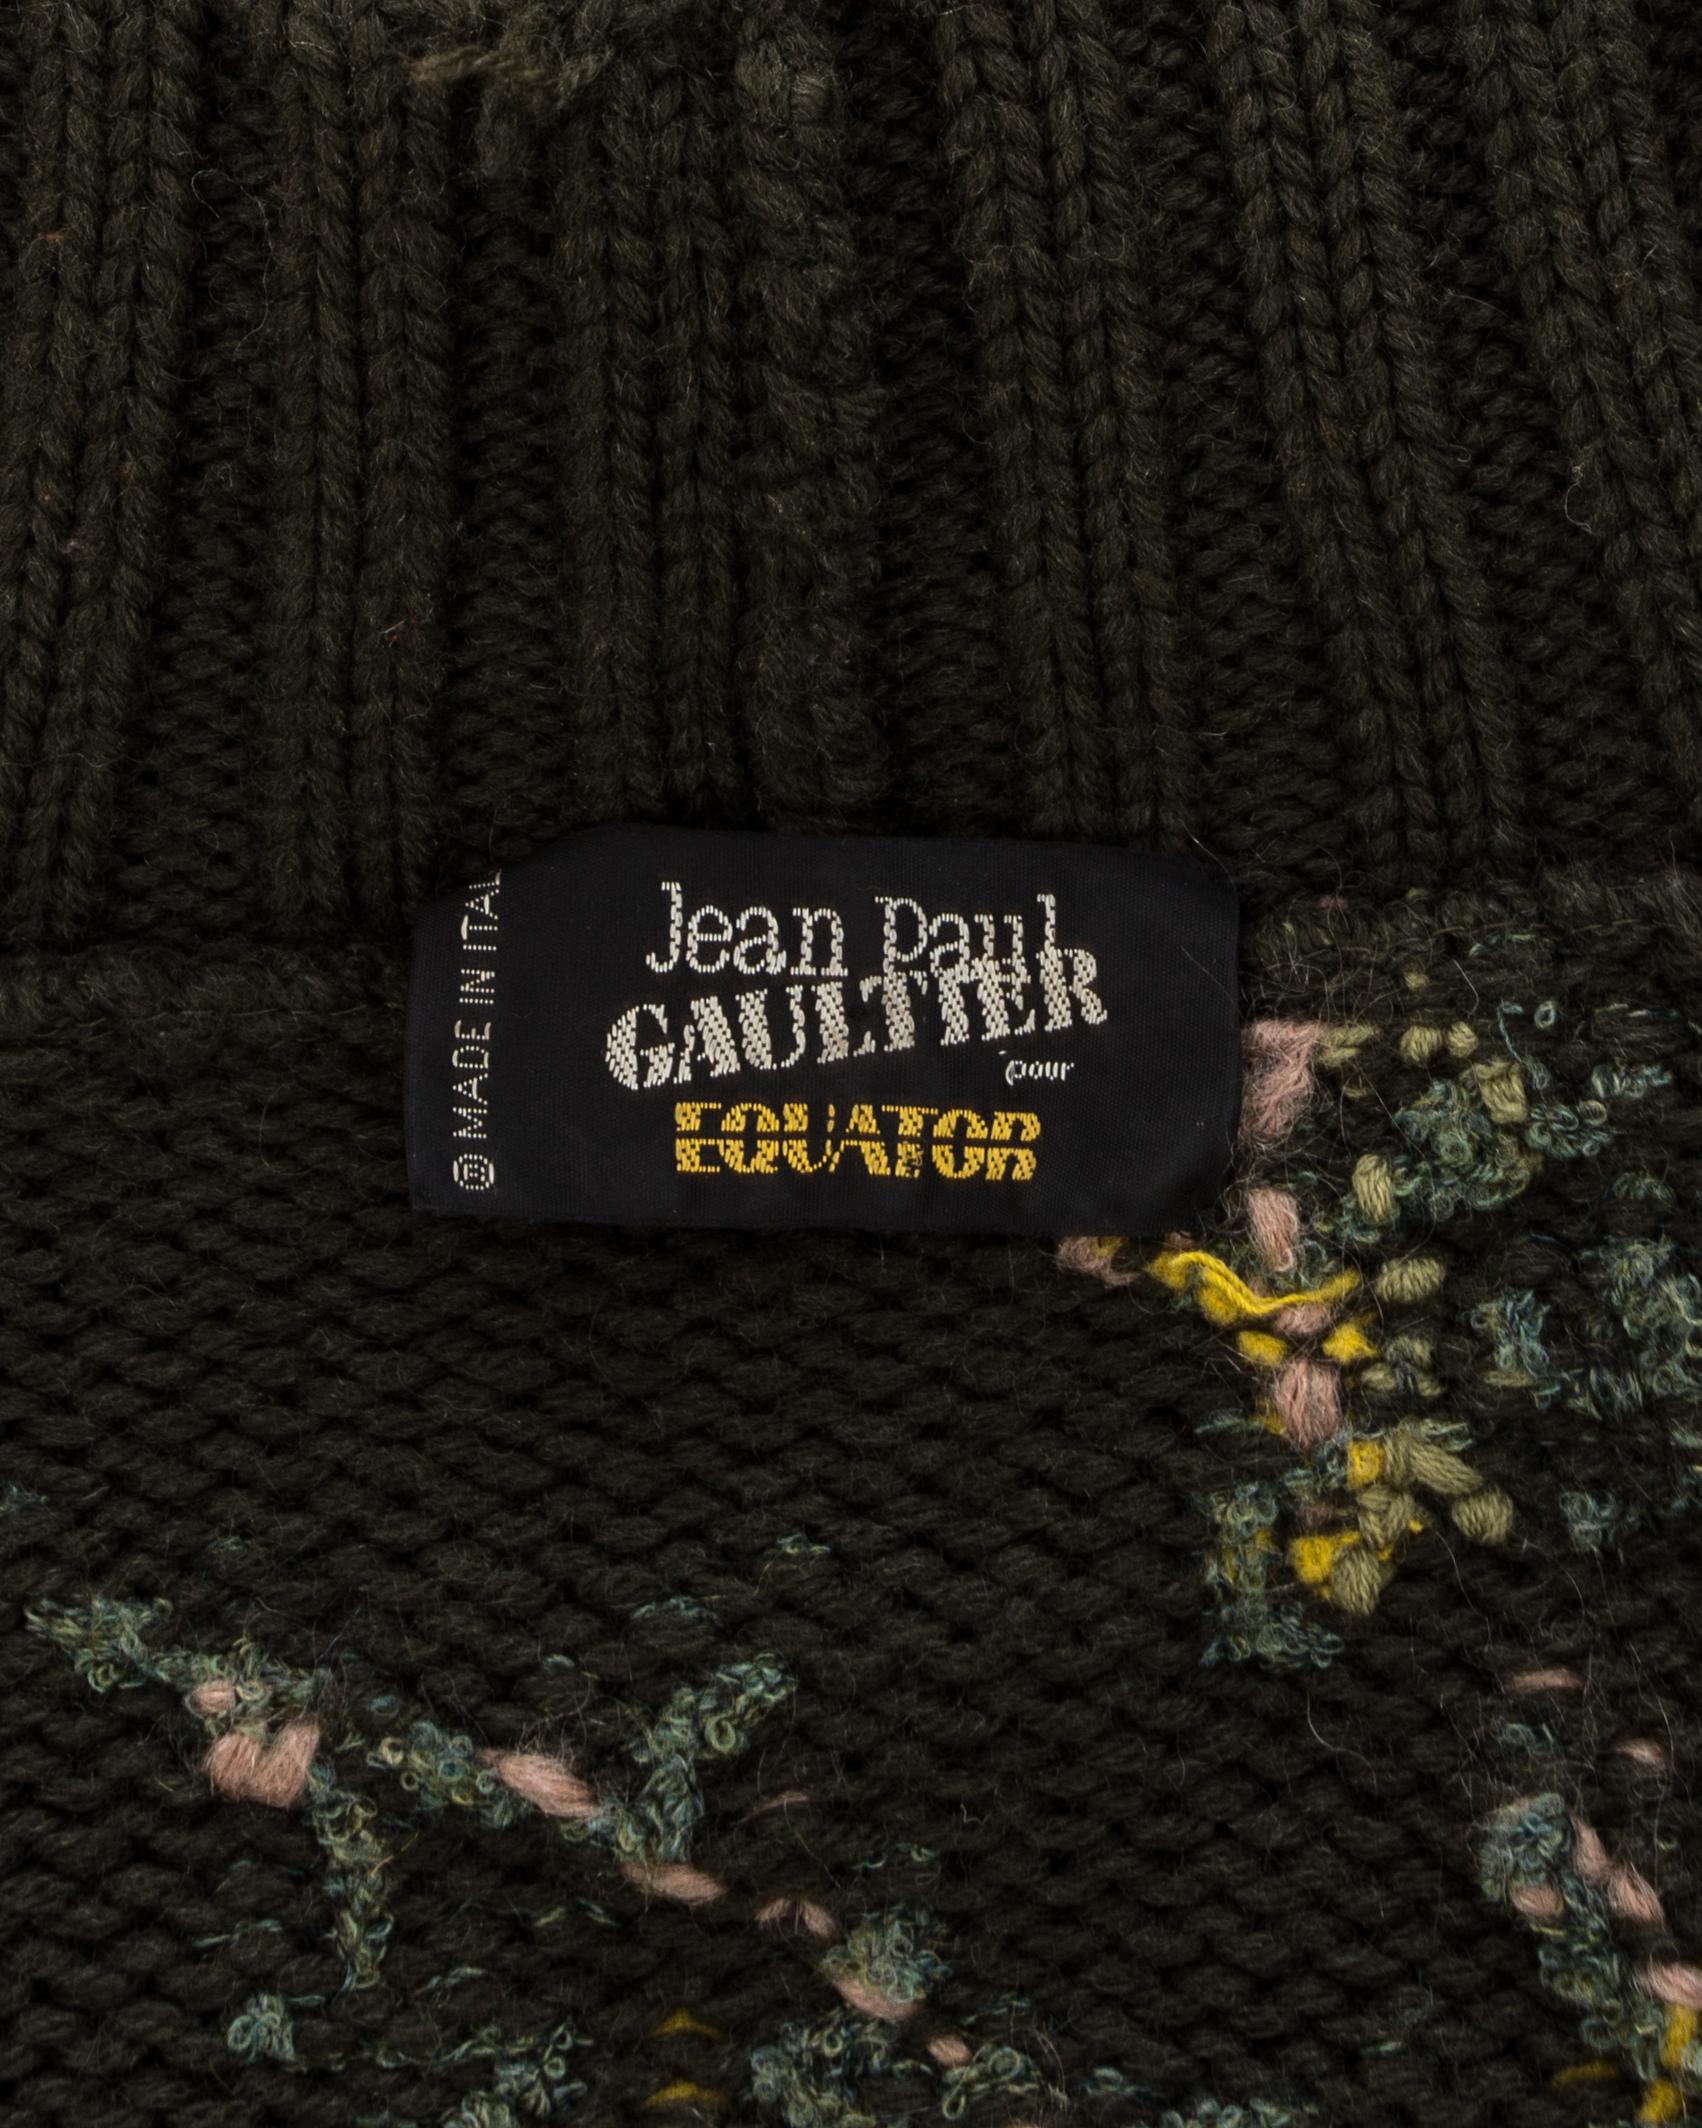 Jean Paul Gaultier knitted wool floral tapestry sweater and skirt set, fw 1984 For Sale 3